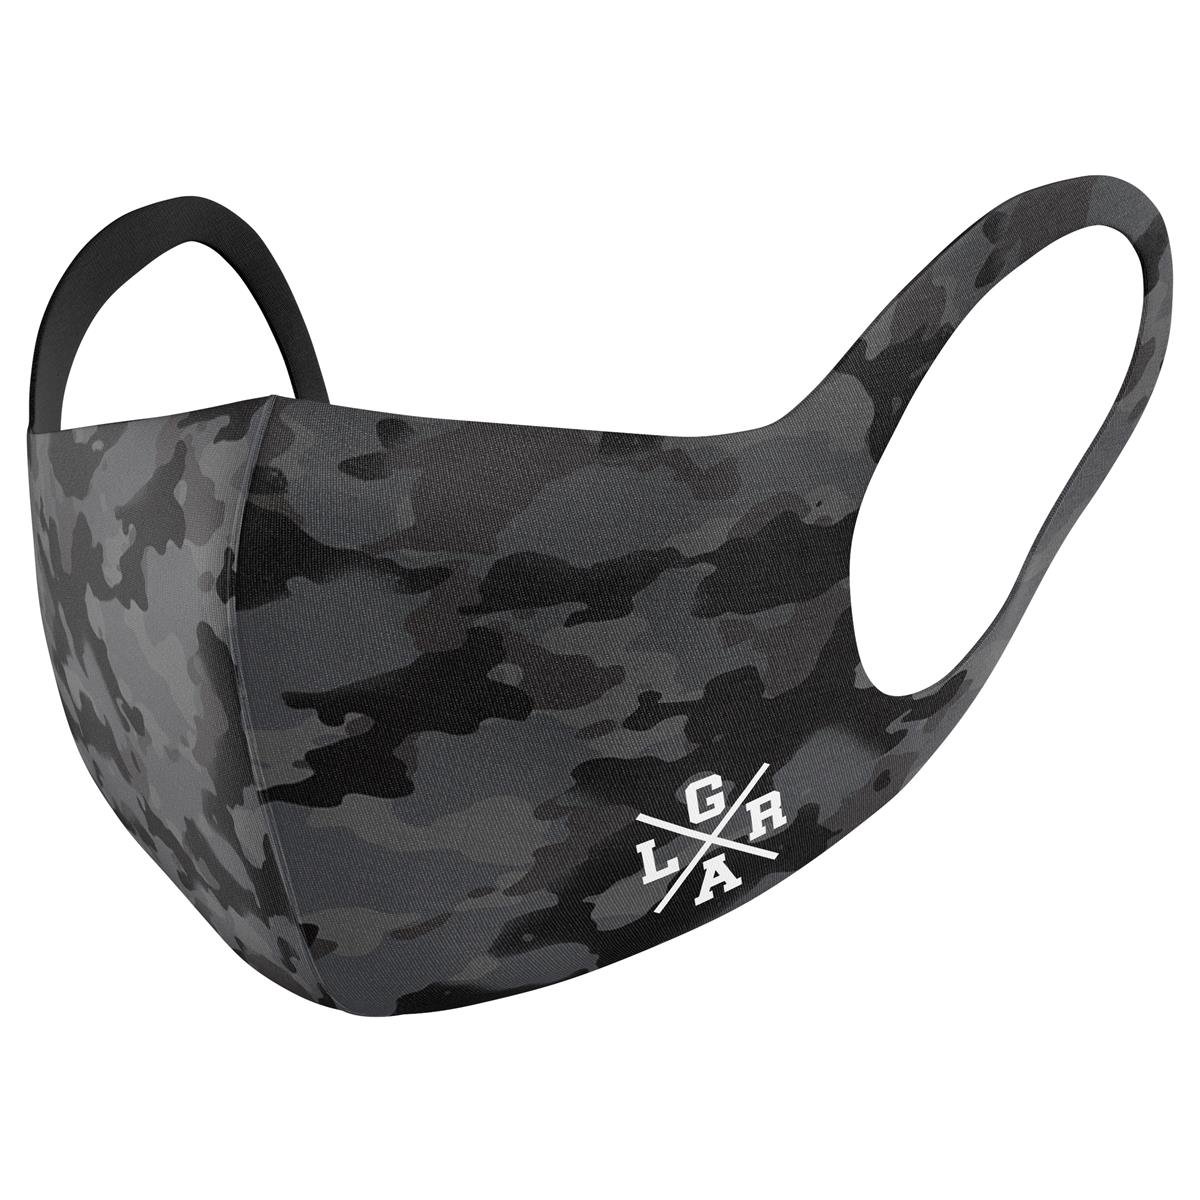 Loose Riders Masque  Camo Charcoal